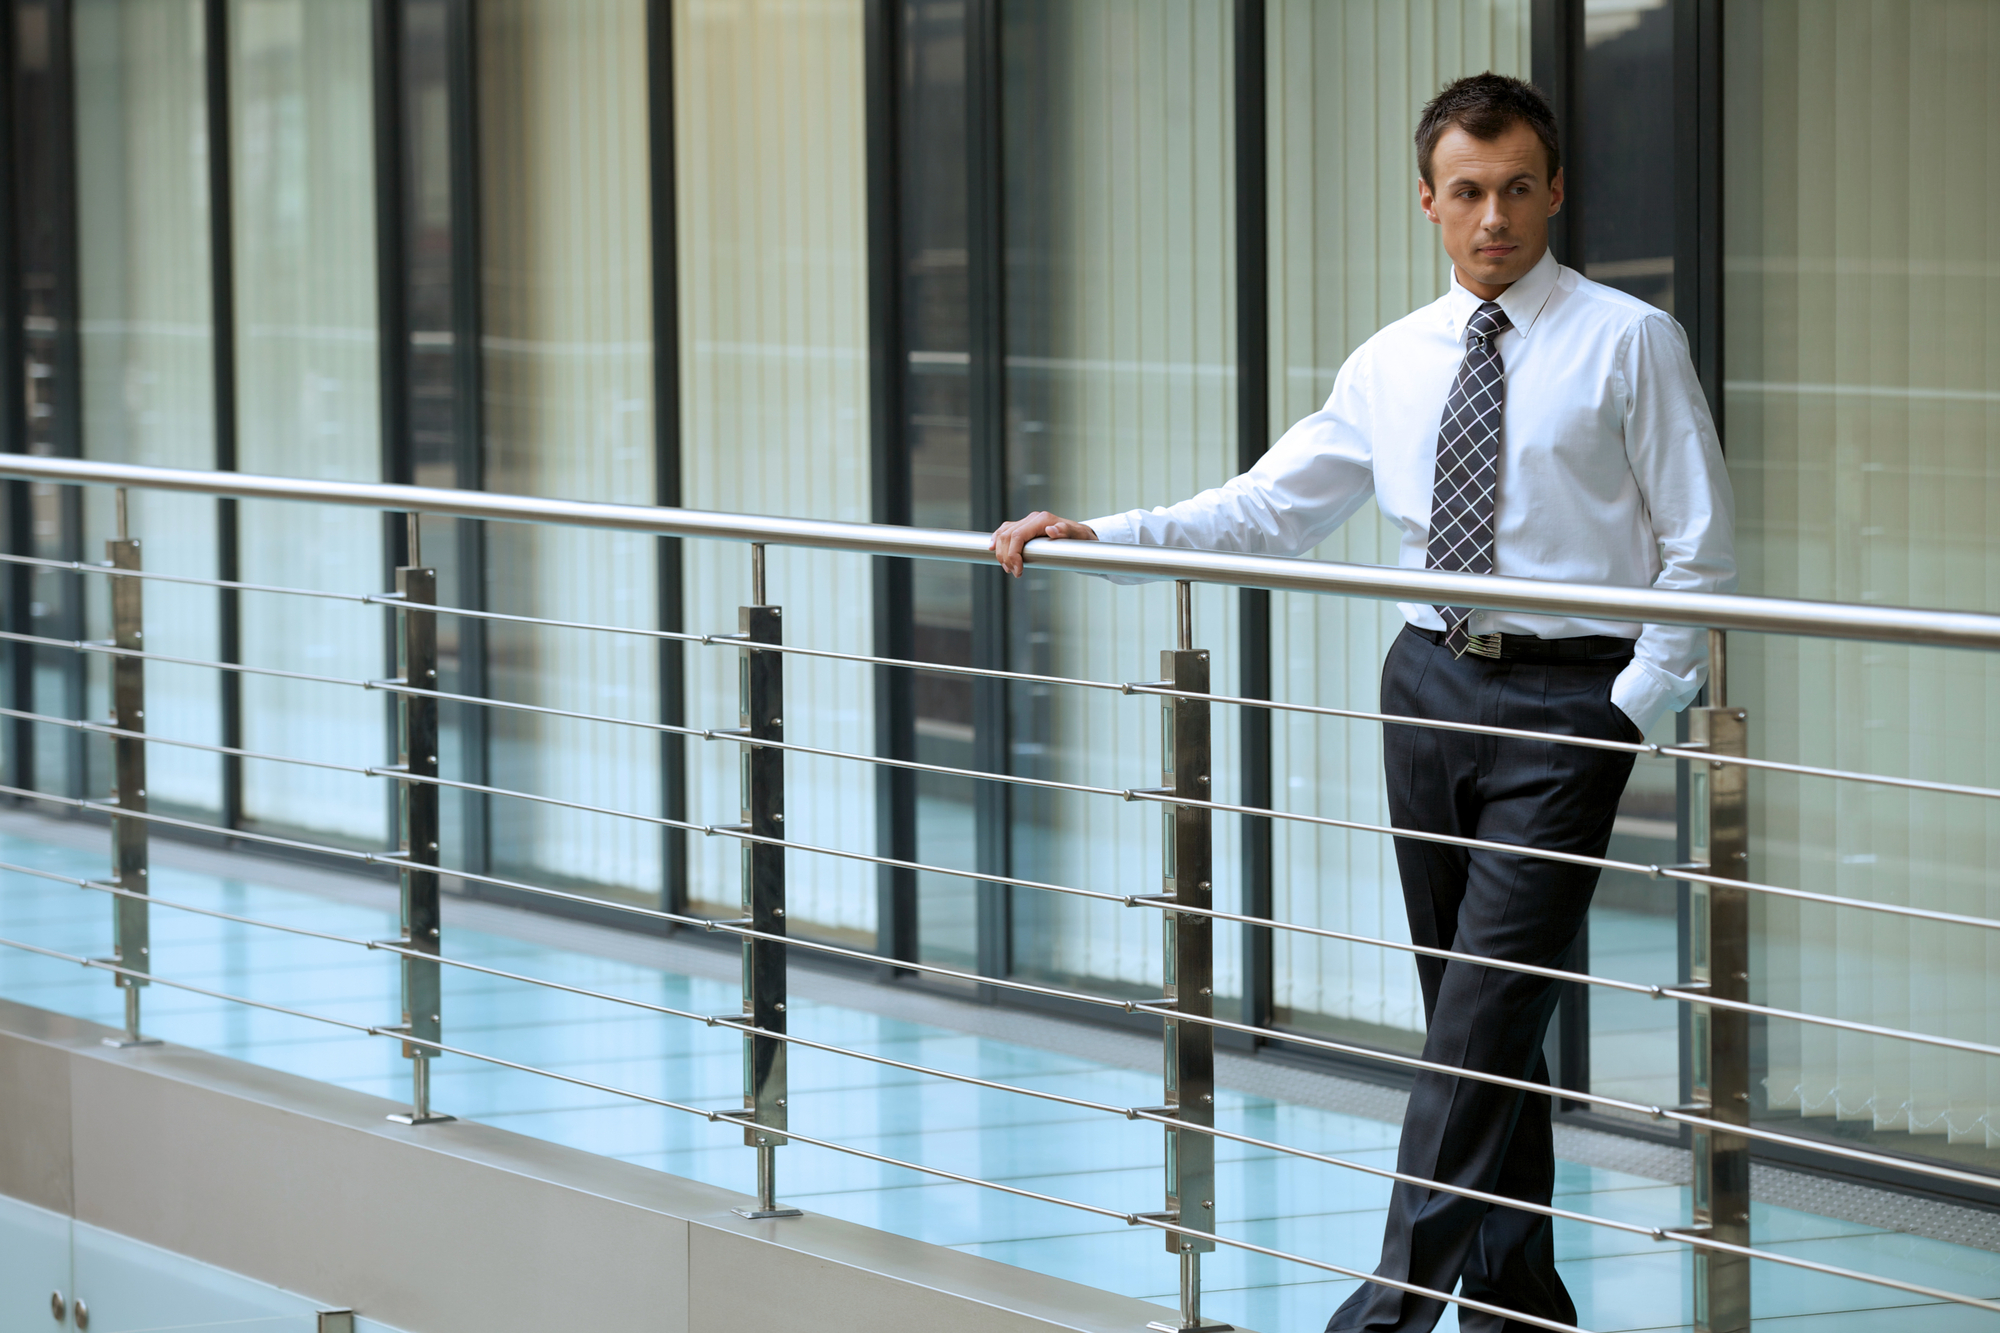 A man in business attire stands on a modern walkway with metal railings, gazing to his right. He is wearing a light blue dress shirt, dark trousers, and a patterned tie. The background features large glass windows with vertical blinds, reflecting a professional environment.